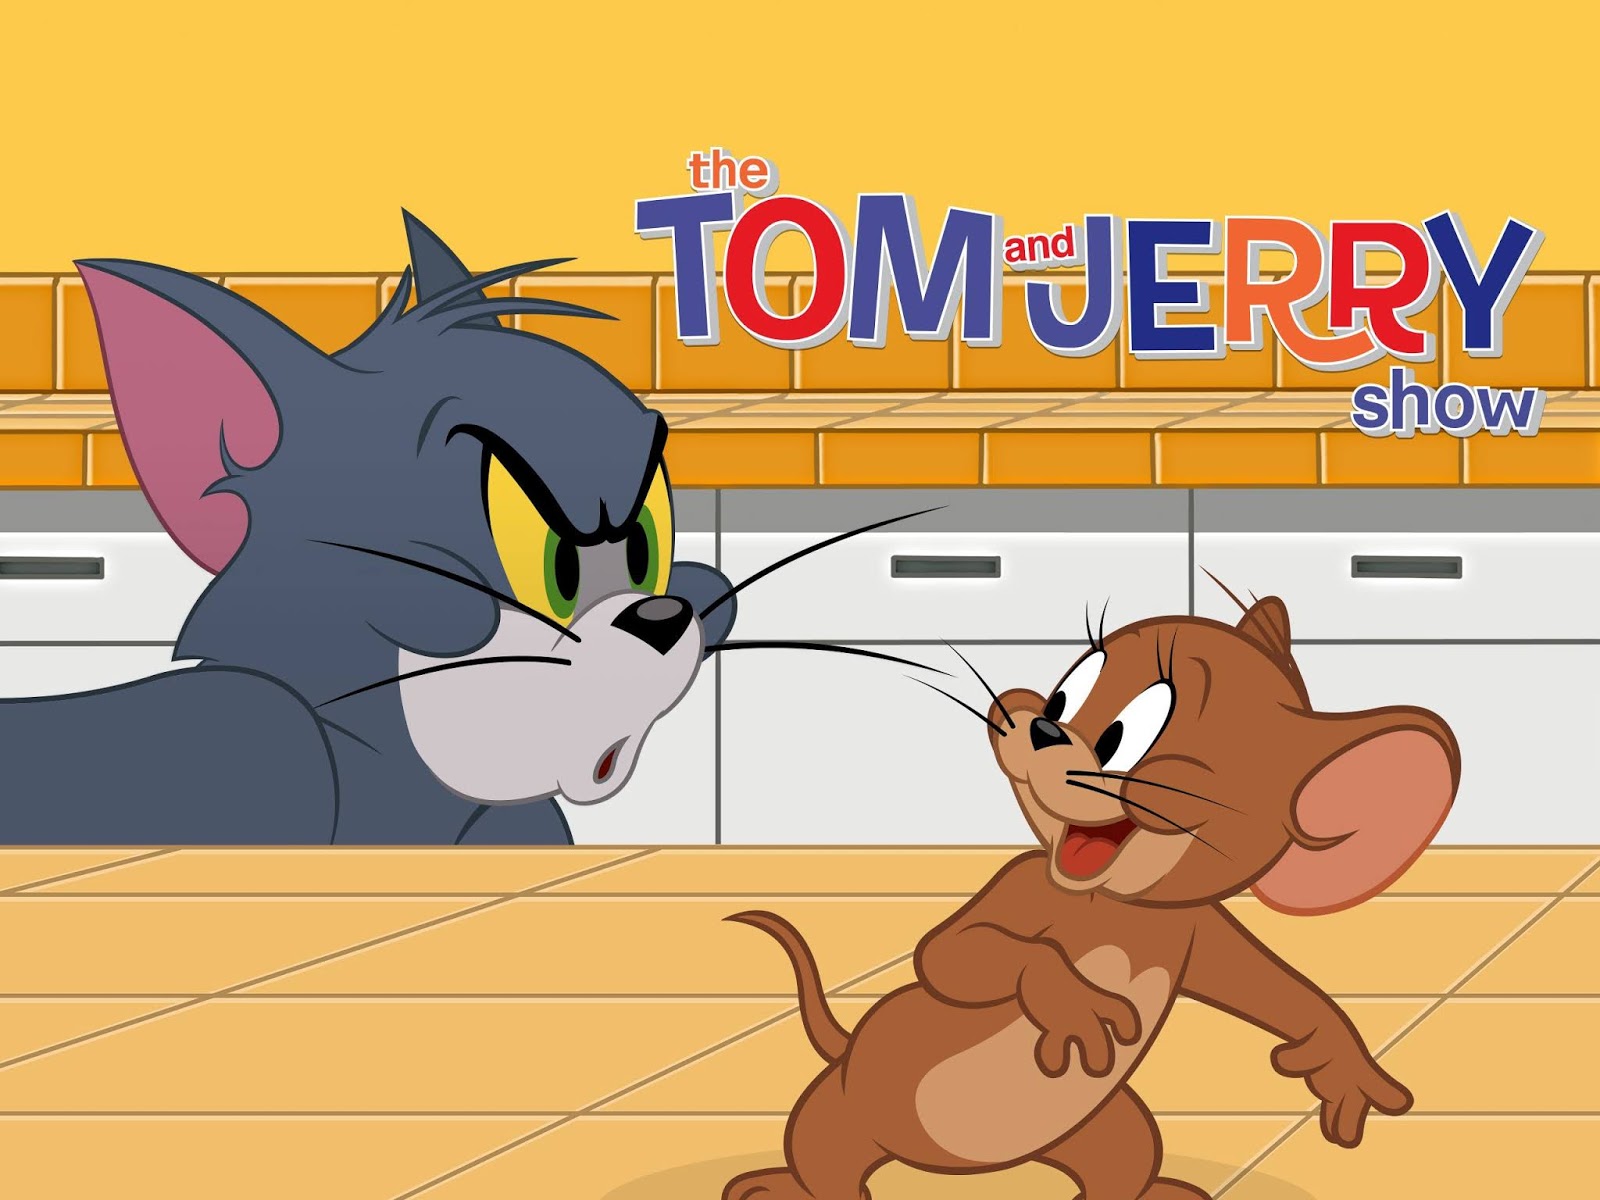 Entertainment Inside Us: June 2020 On Boomerang Africa. The Tom And Jerry Show. Moka's Fabulous Adventure